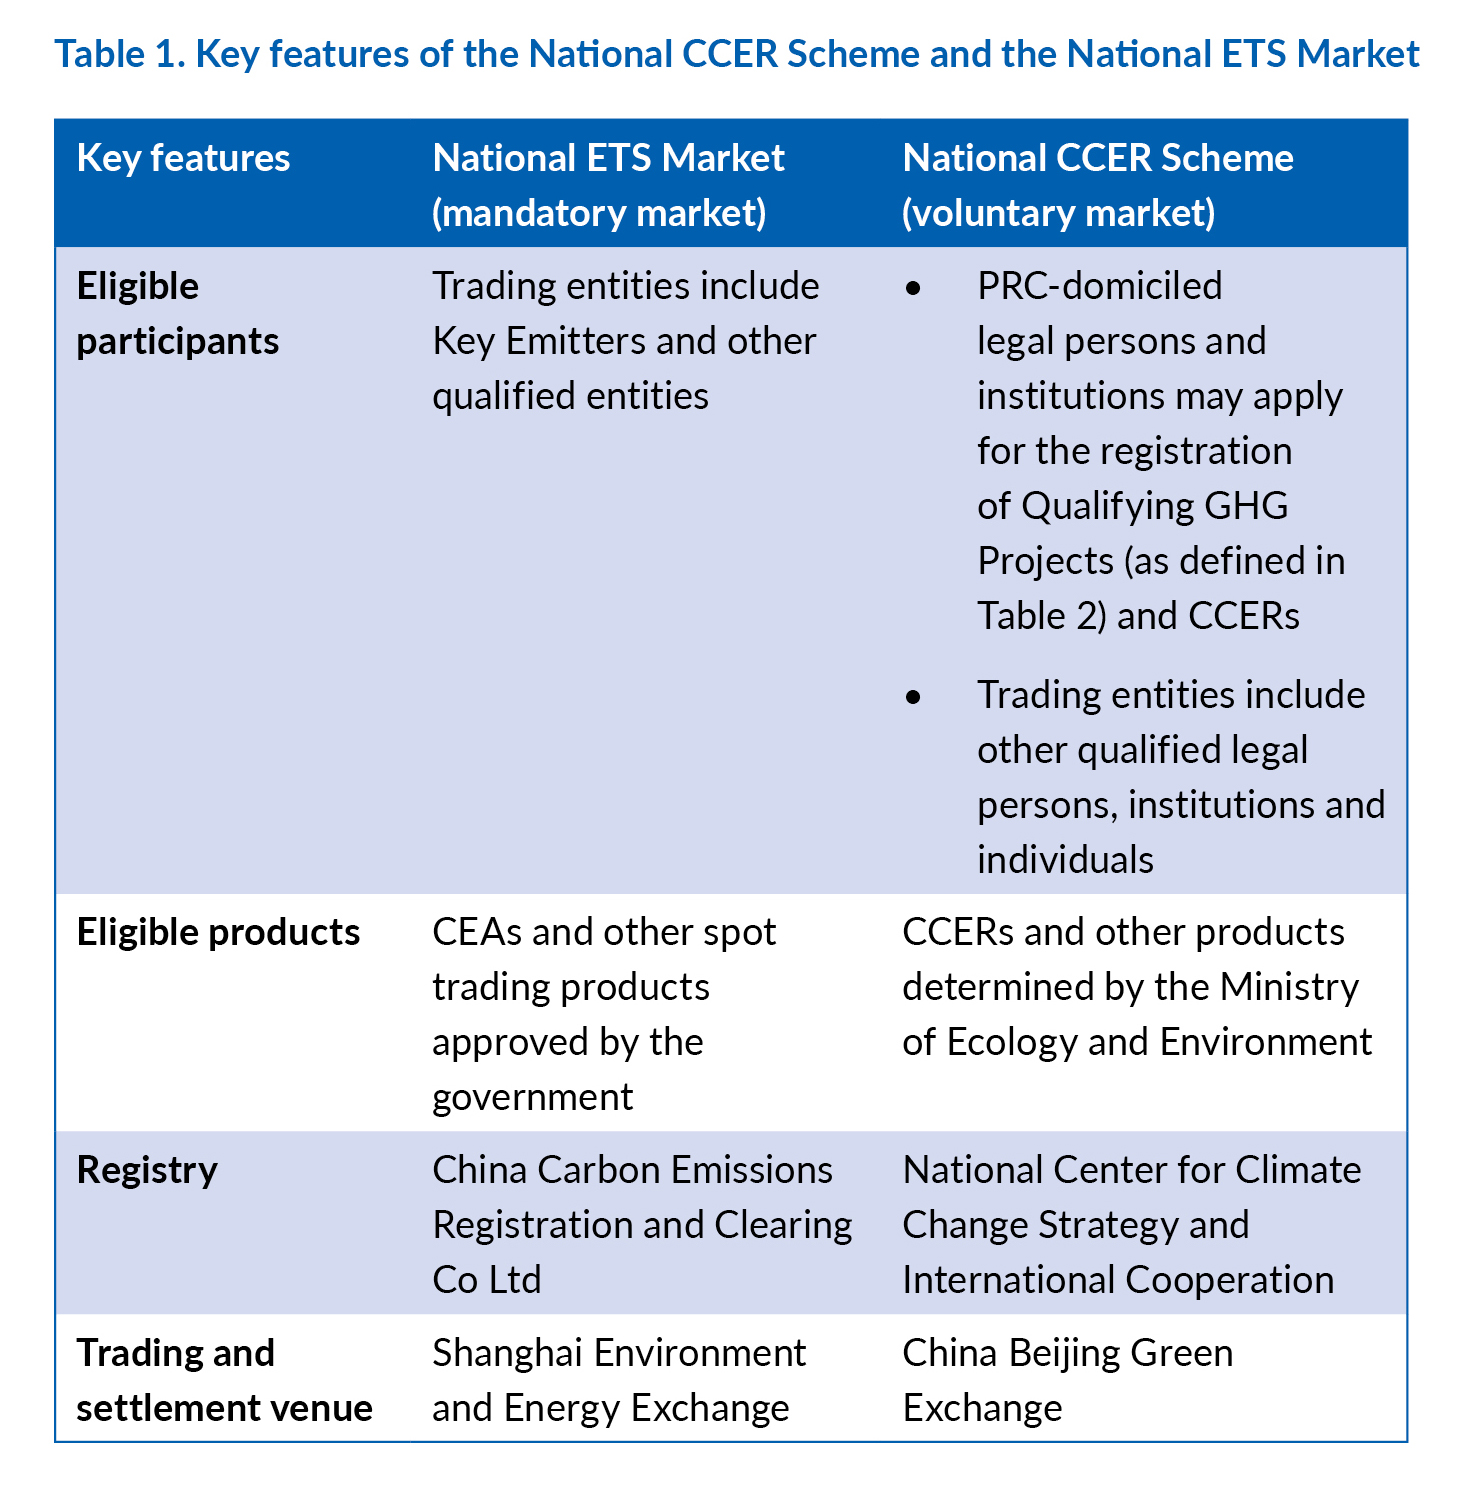 Table 1. Key features of the National CCER Scheme and the National ETS Market